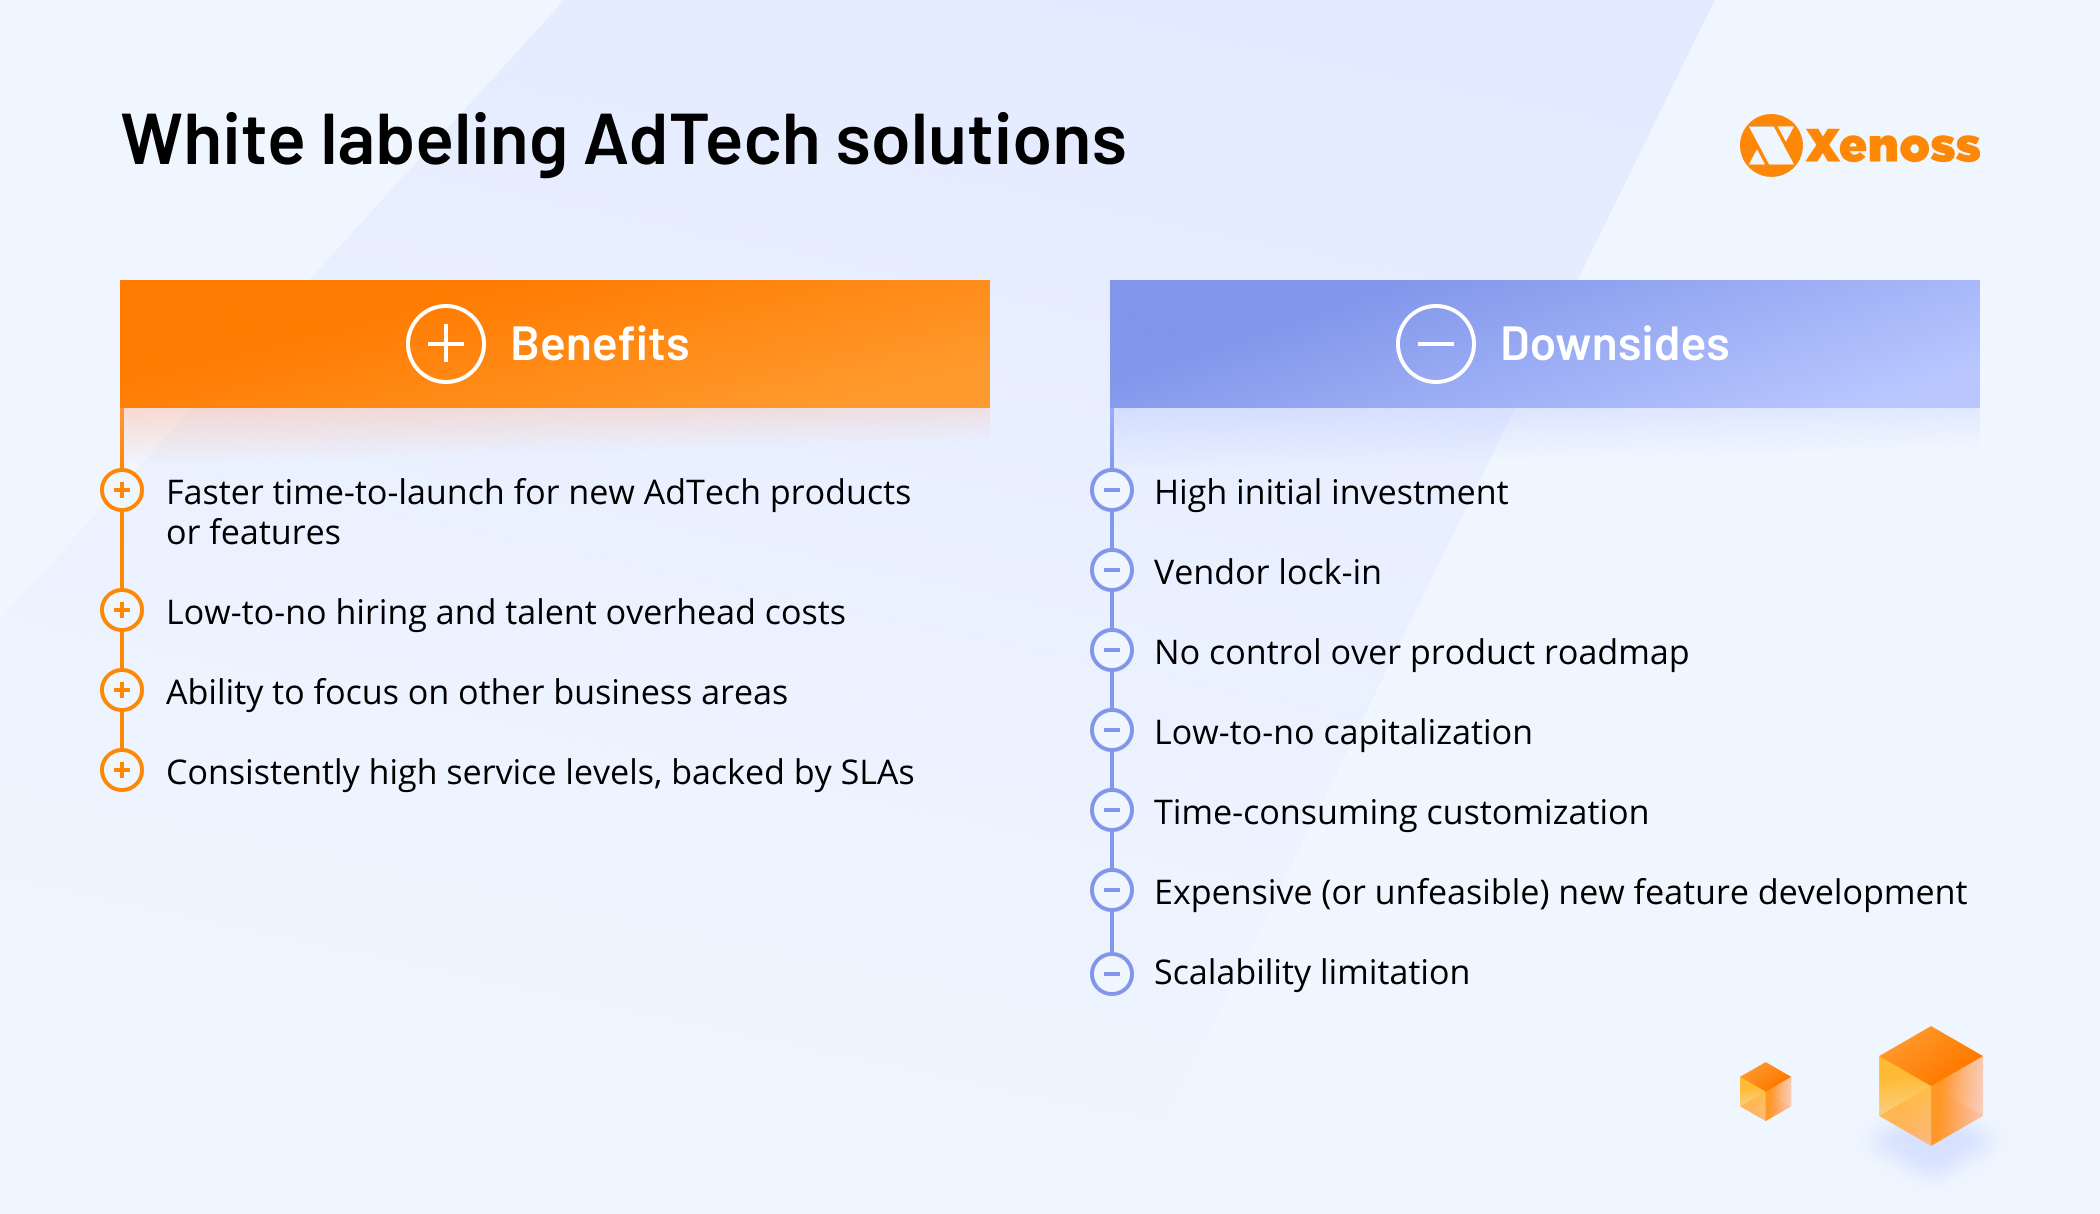 Pros and cons of white-labeling AdTech solutions | Xenoss Blog